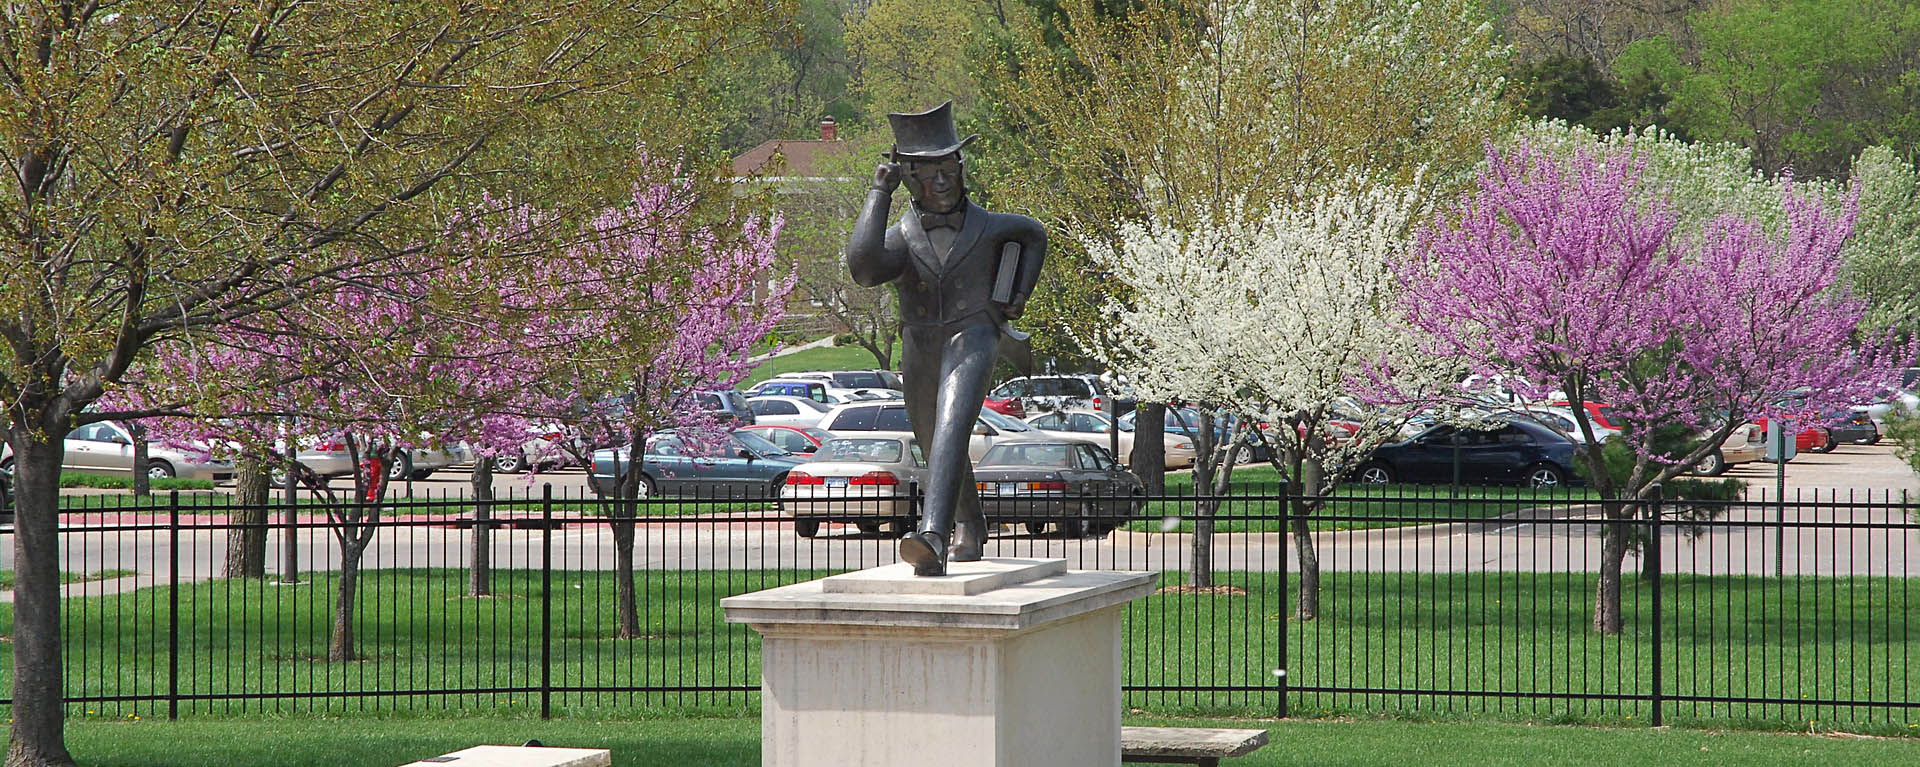 Ichabod statue with spring trees